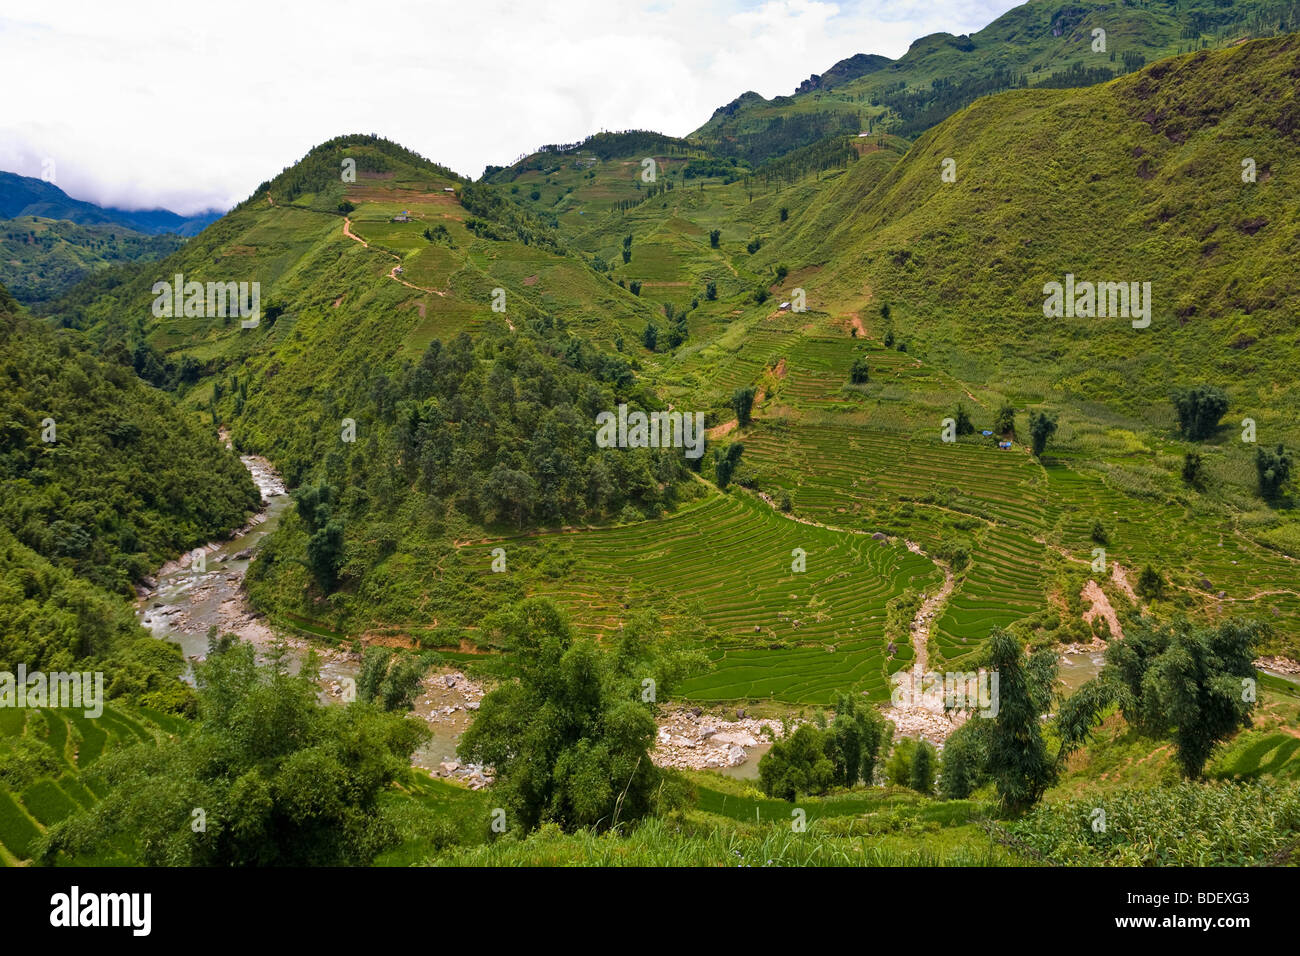 A muddy river passes through a green, terraced valley in Sapa, north Vietnam Stock Photo